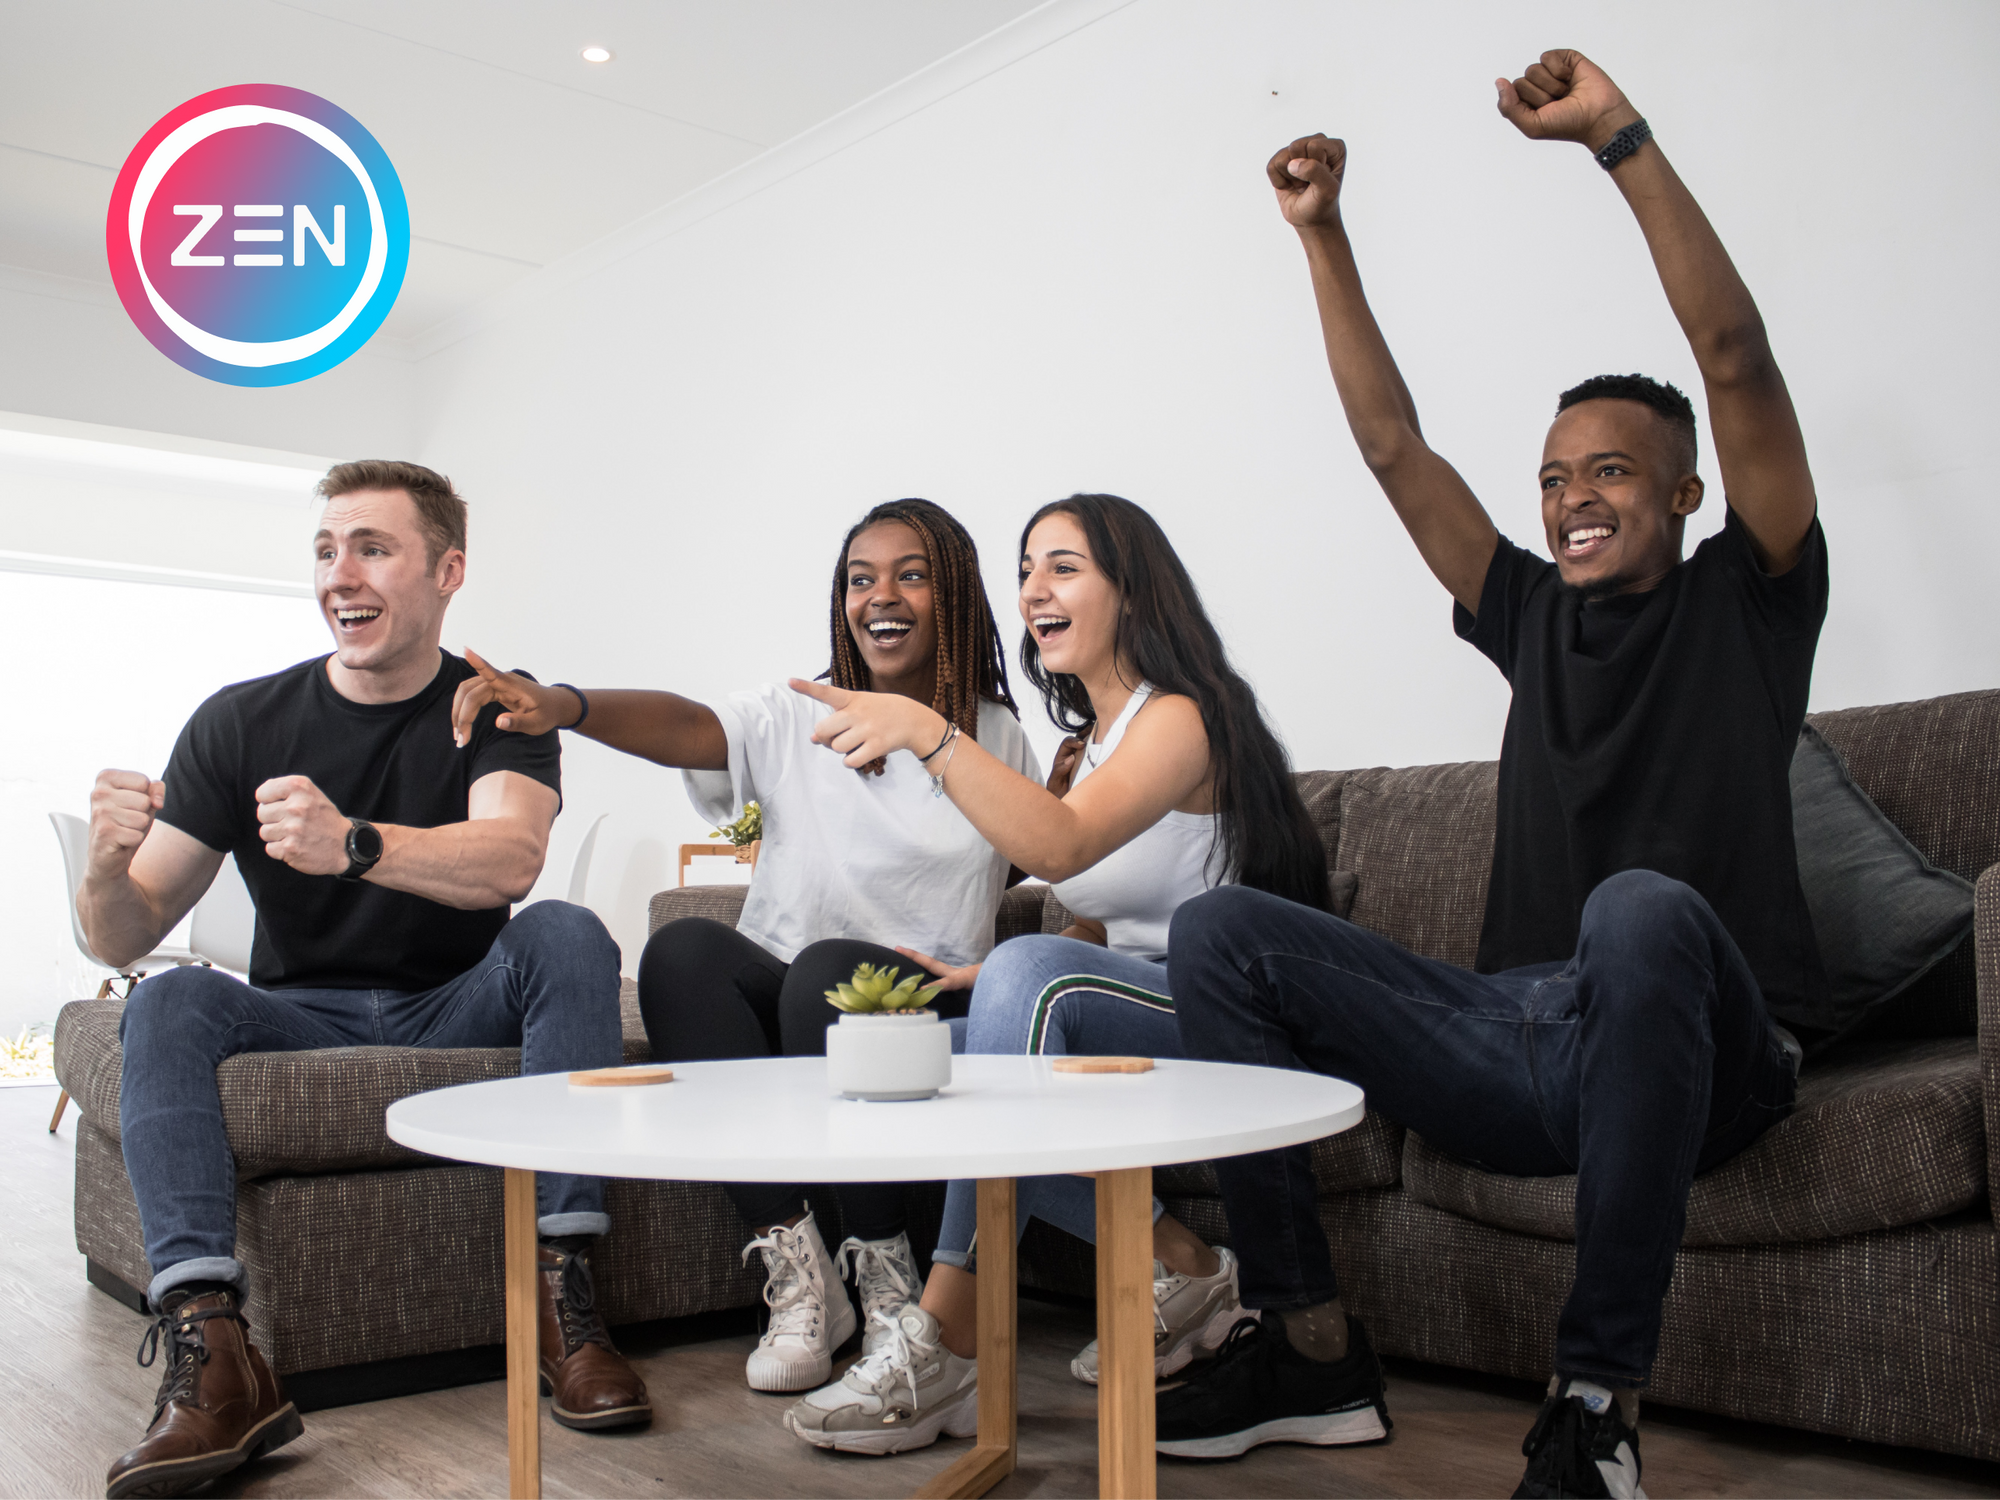 A group of friends sitting on couch pointing and cheering 